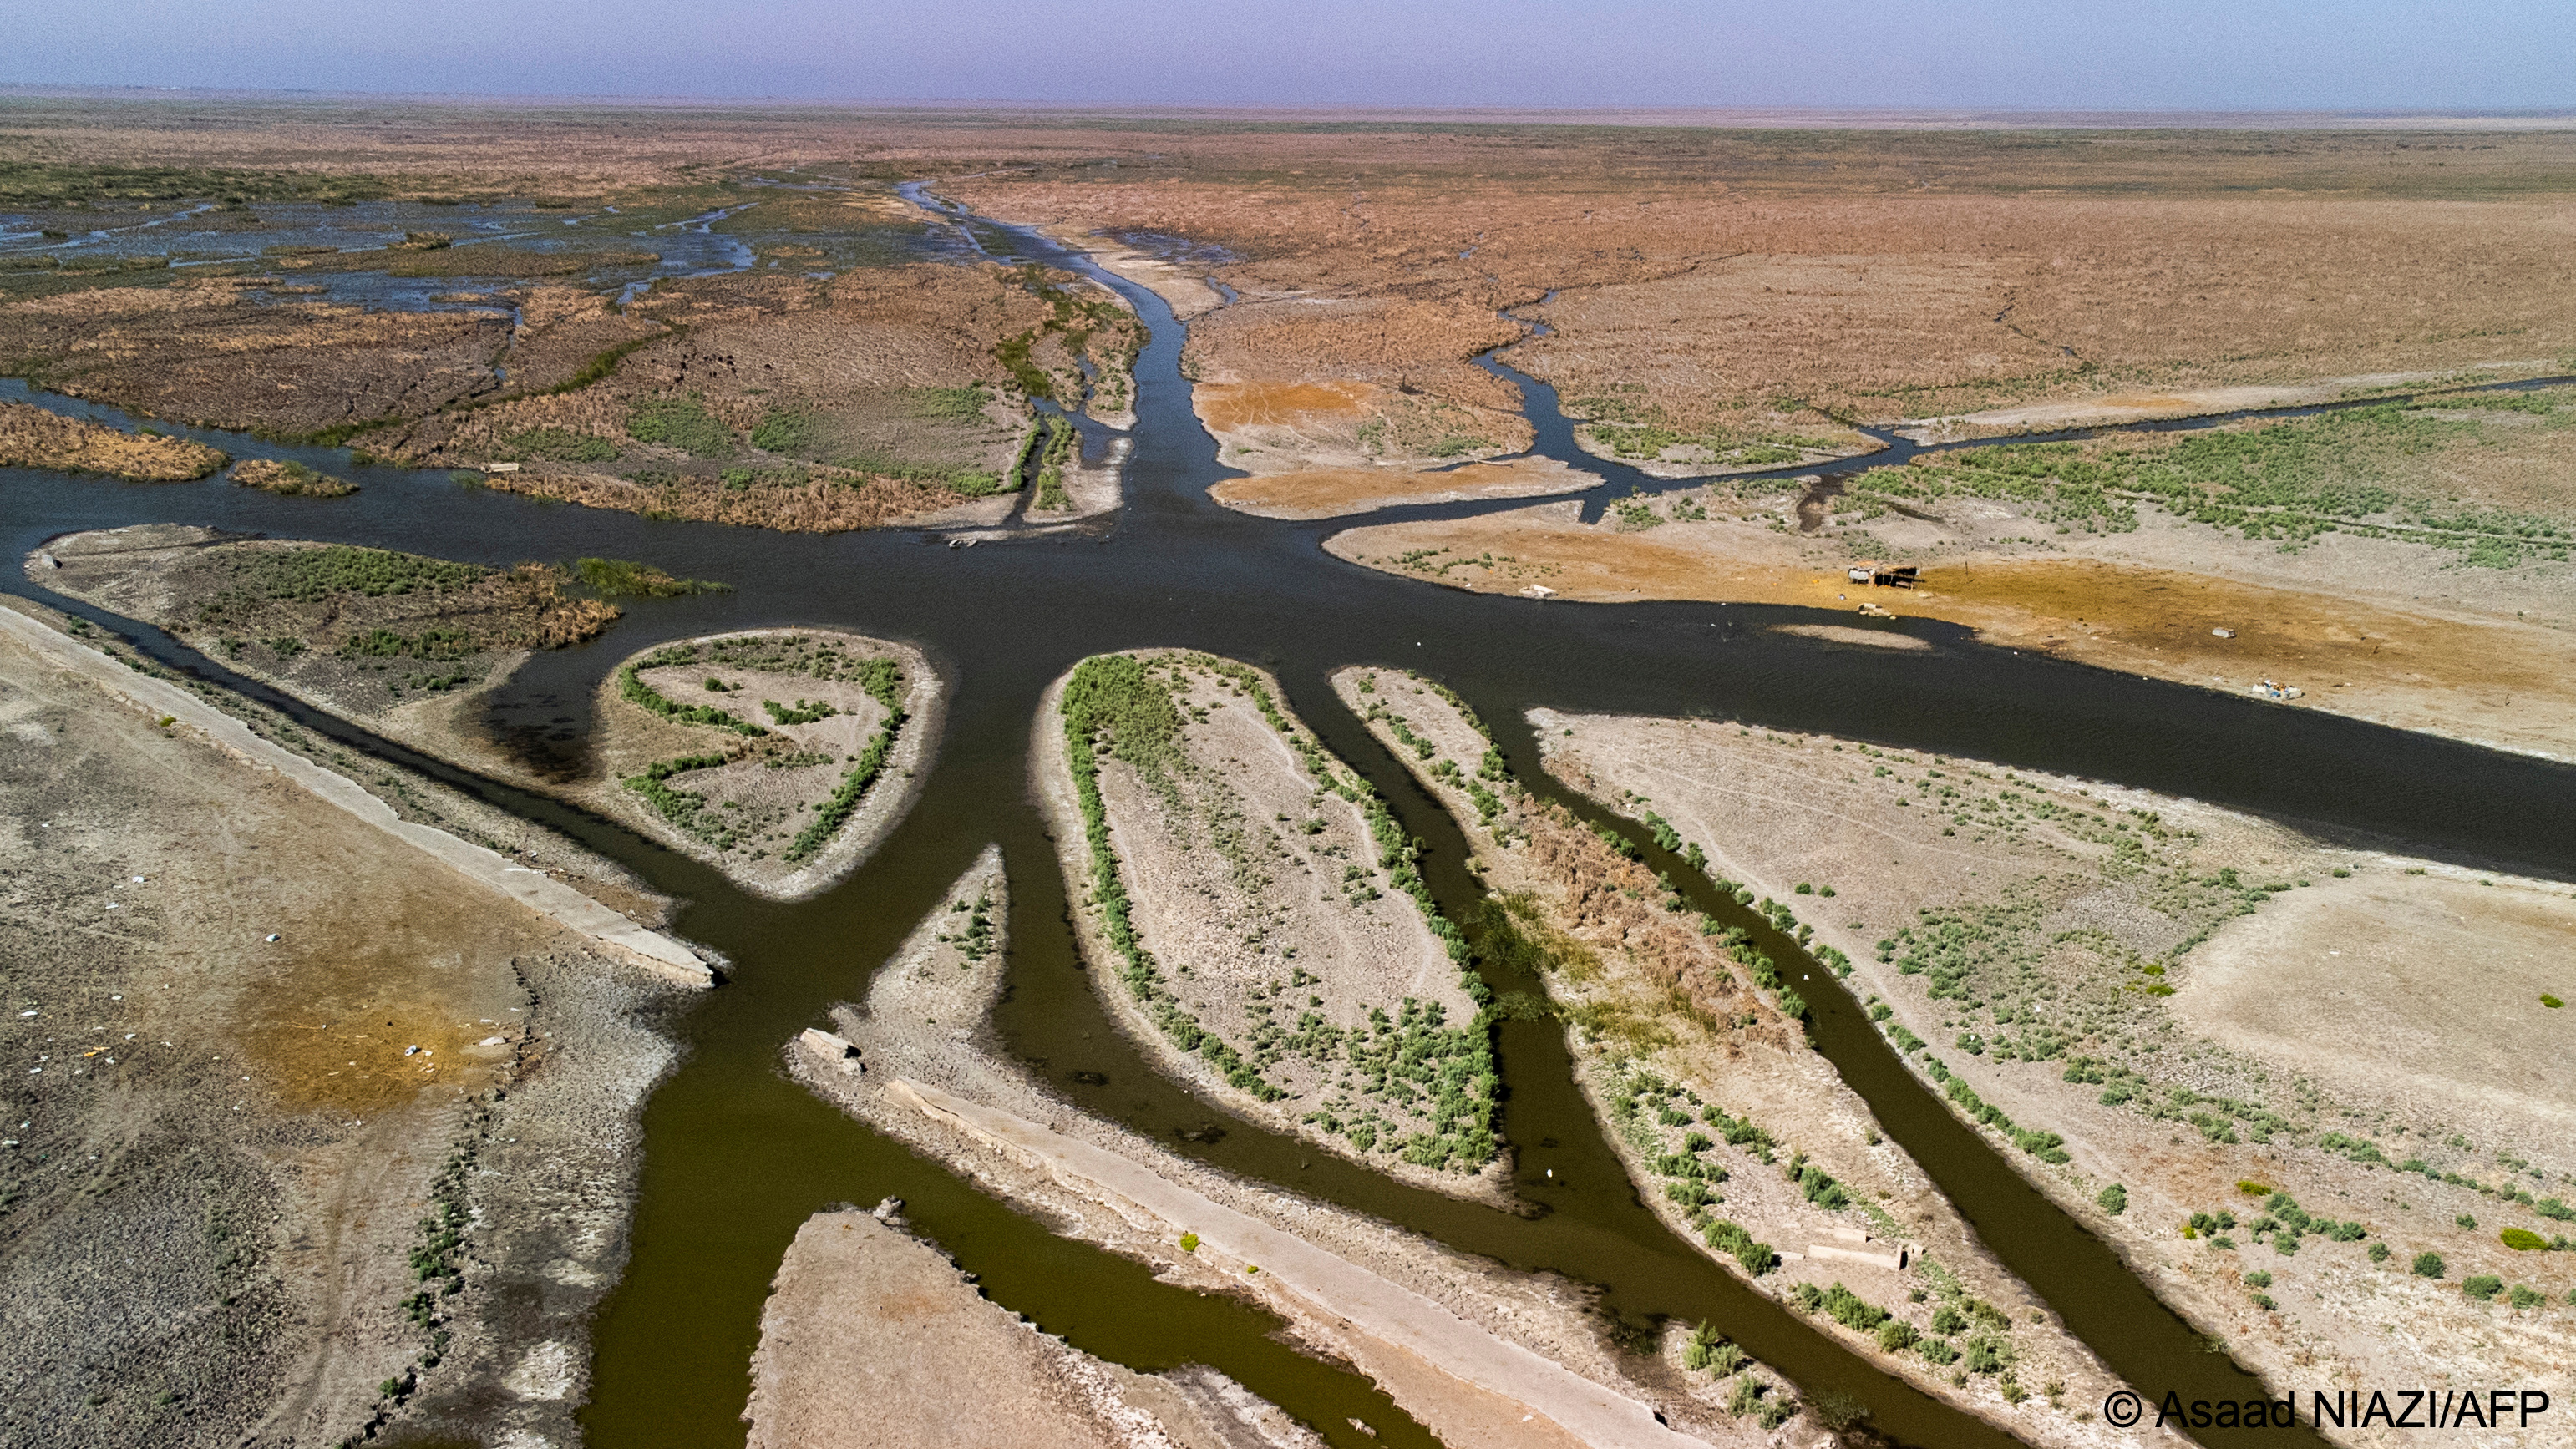 An aerial view of the dried-up marshes of Chibayish, Dhi Qar Governate, southern Iraq (photo: Asaad Niazi/AFP)